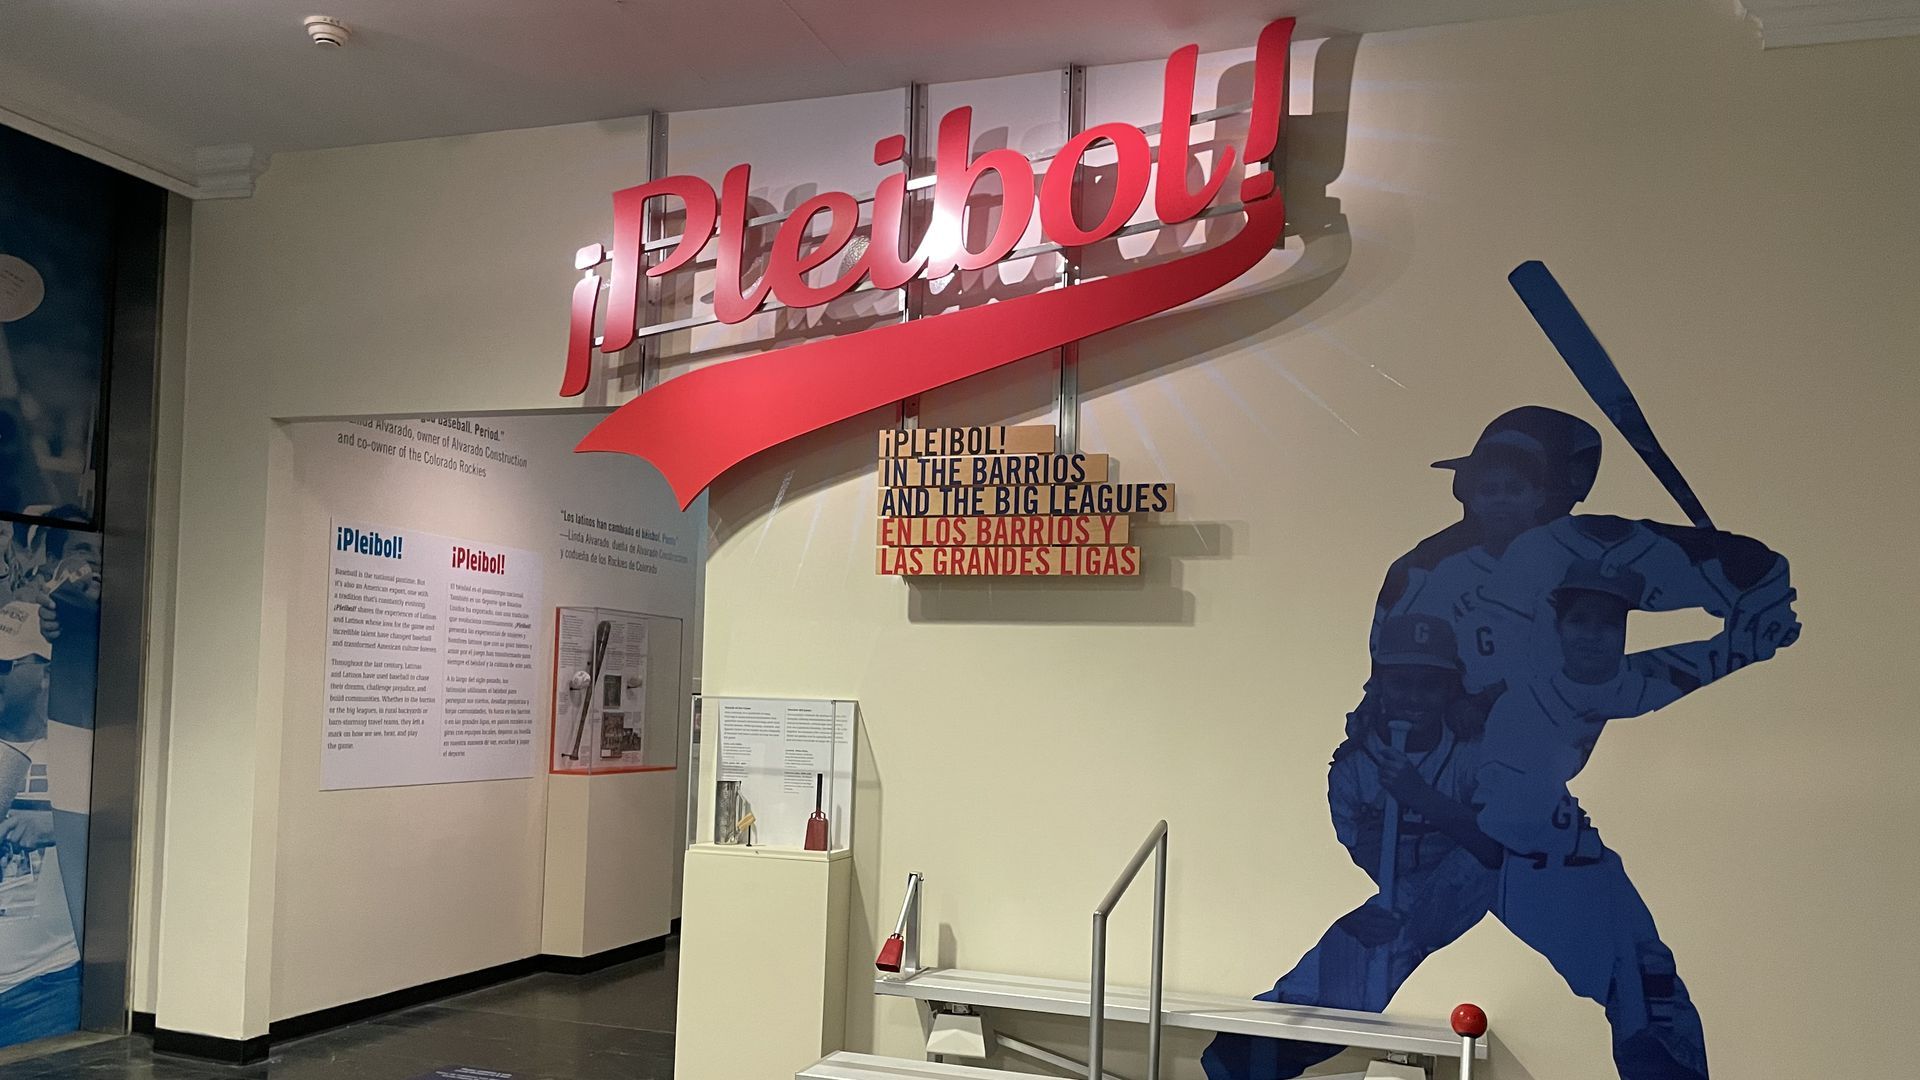 The blue silhouette of a baseball batter sits to the right of a red sign with the word "¡Pleibol!"